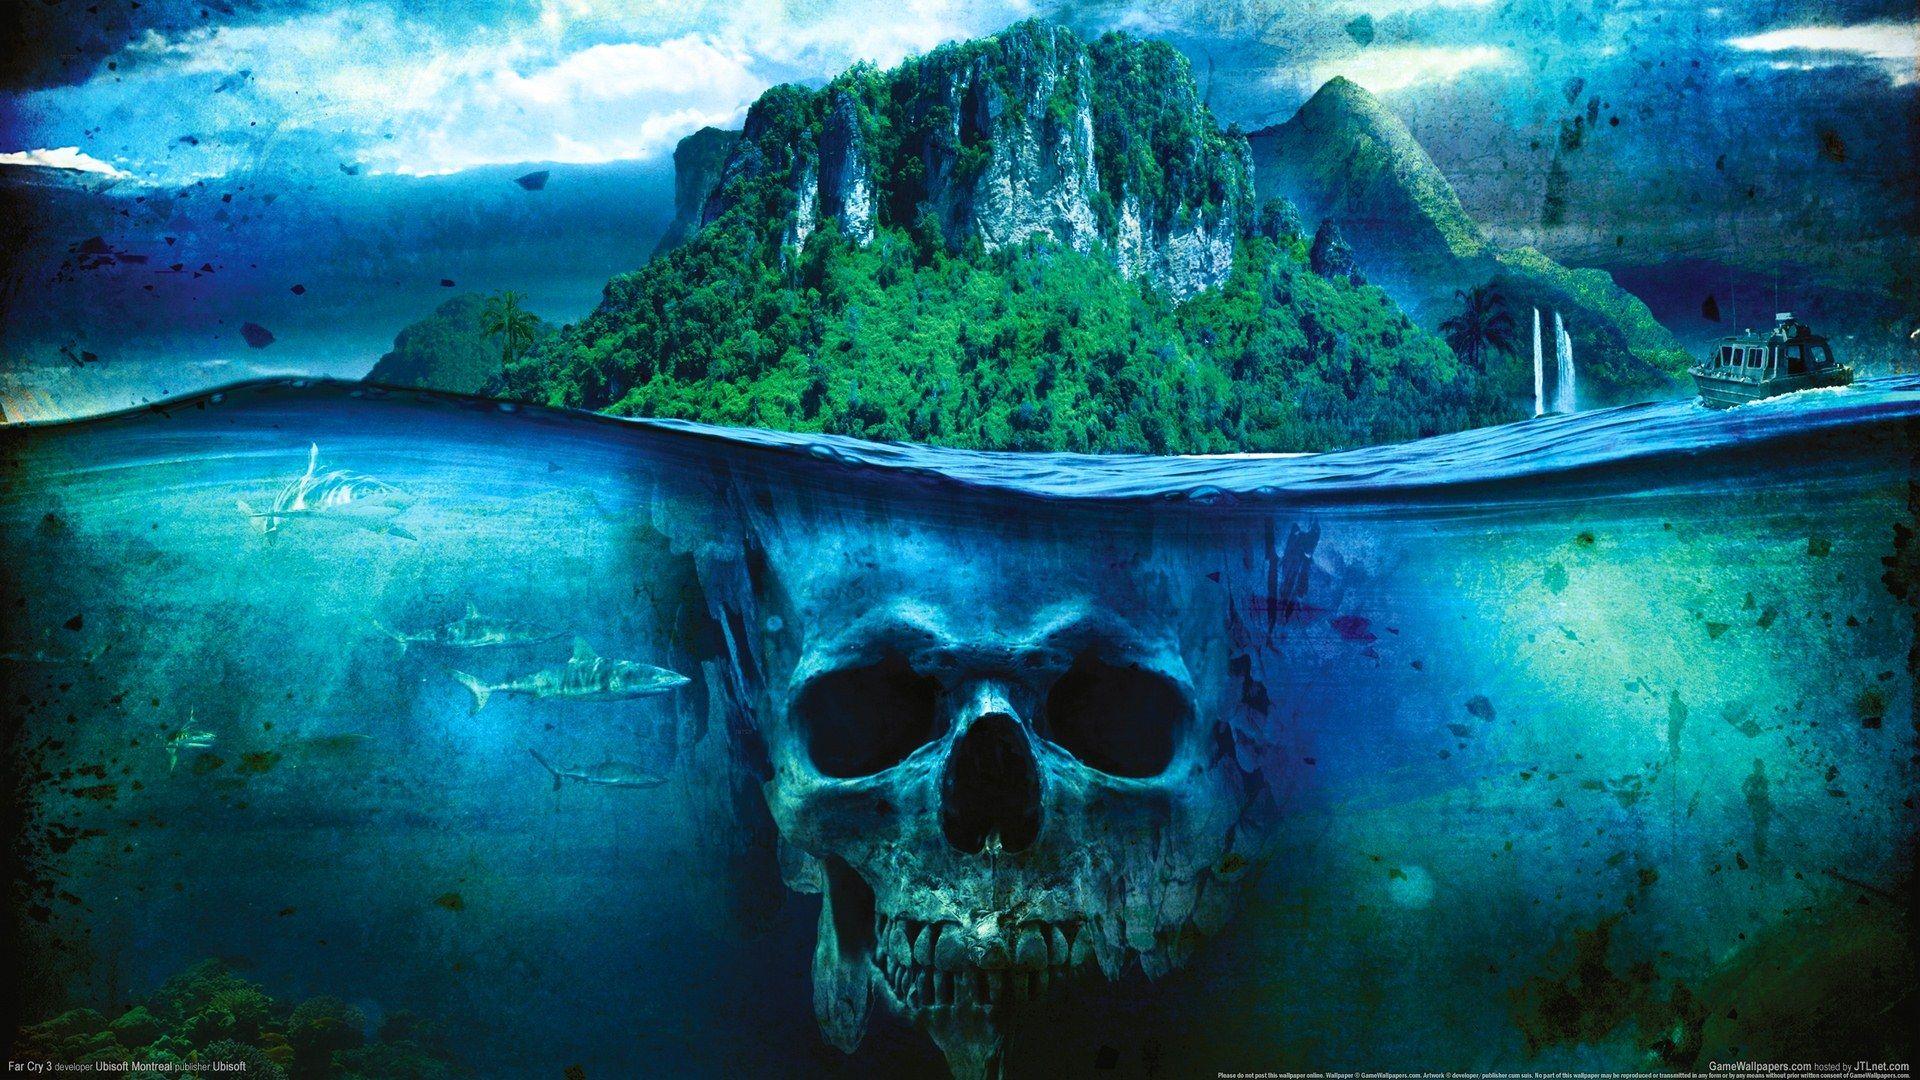 To Download or Set this Free Skull Island Wallpaper as the Desktop